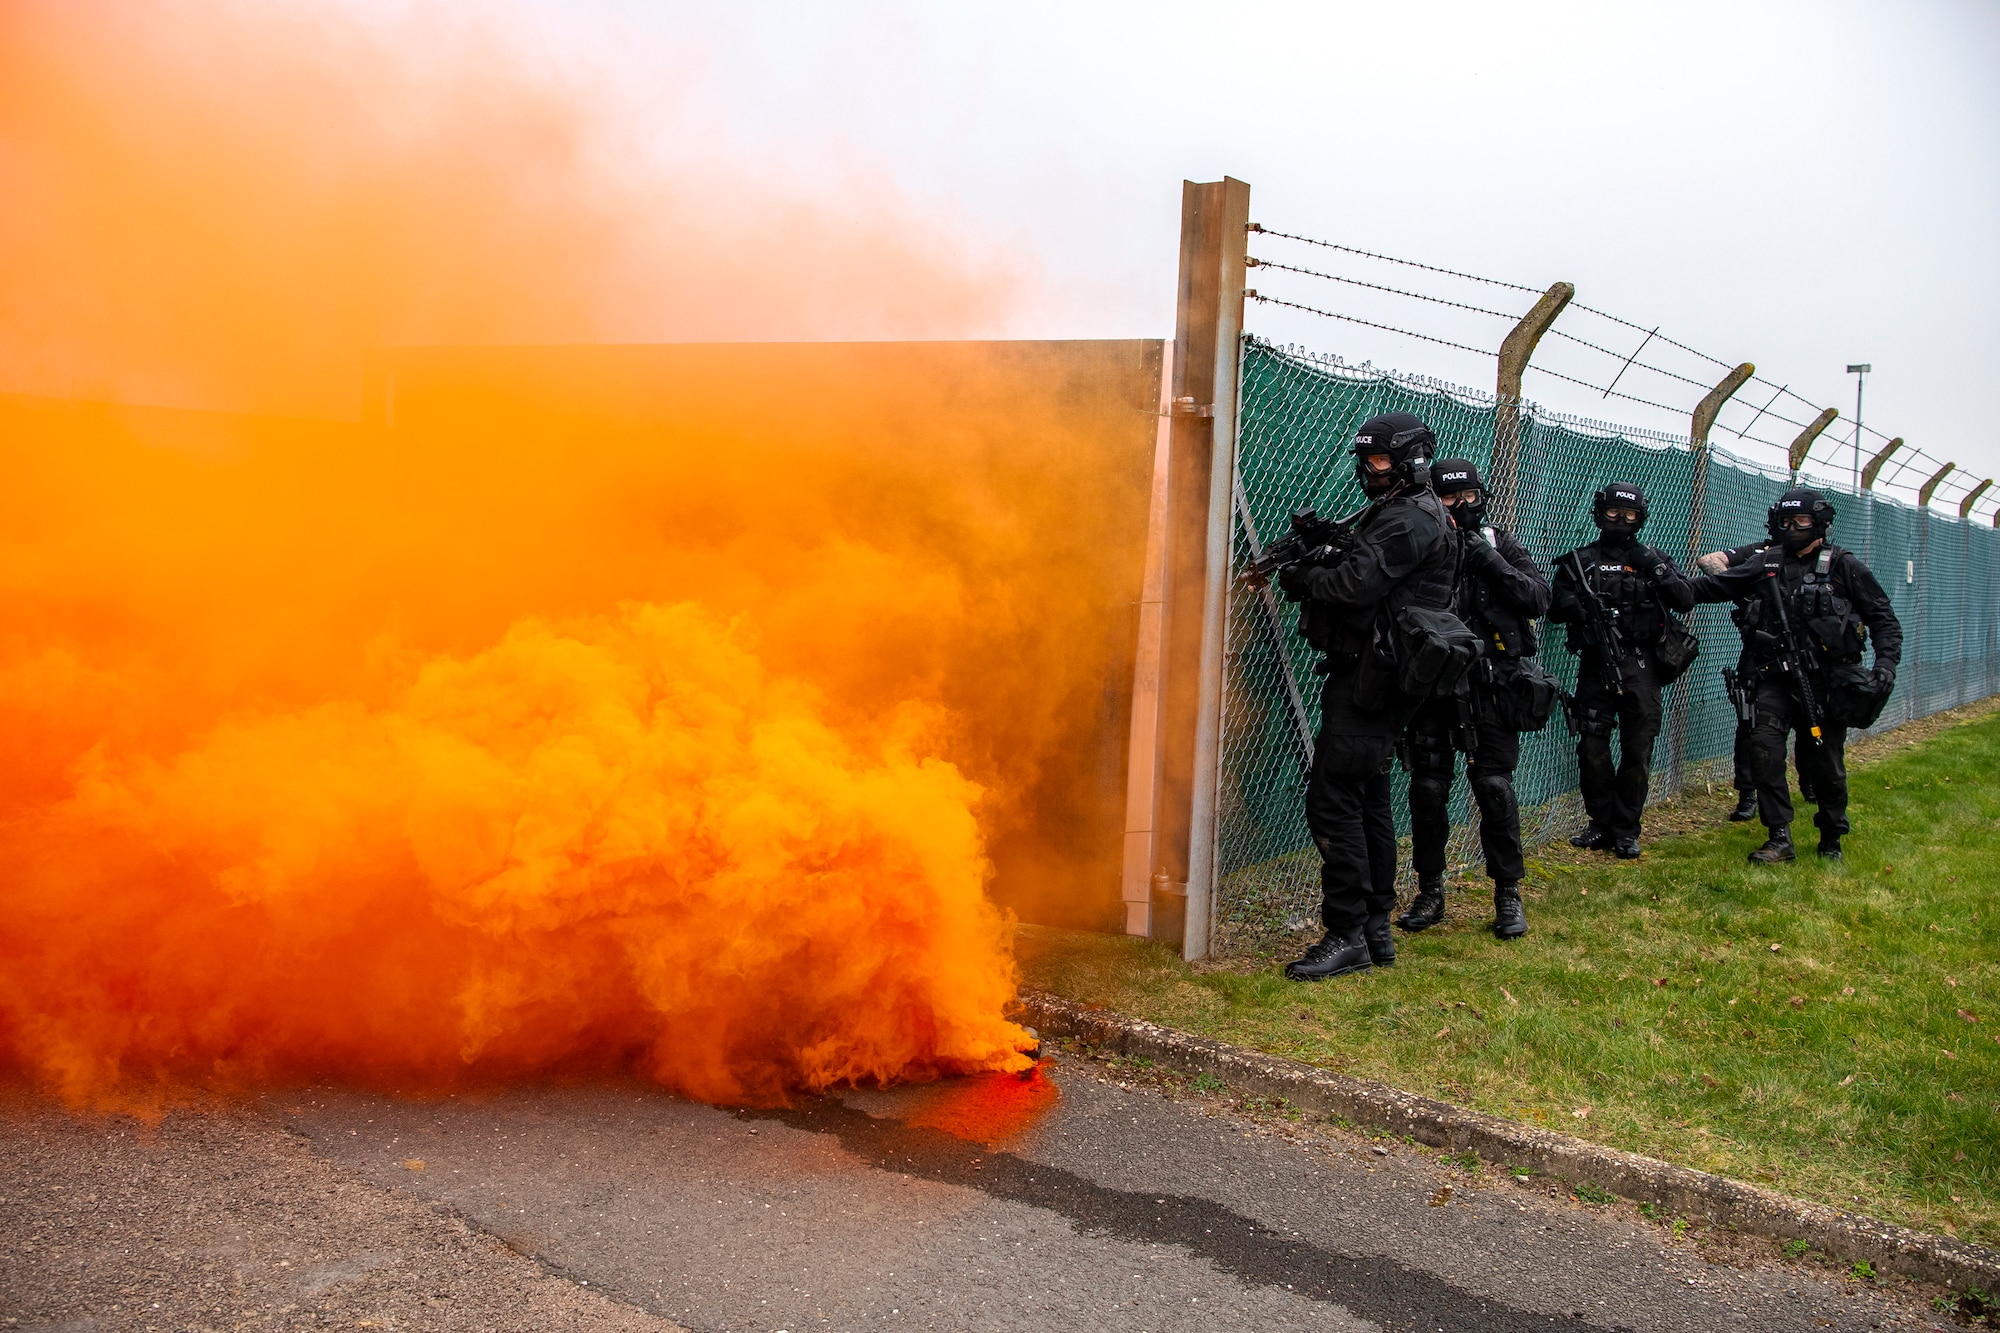 Policemen from the Northamptonshire Police Department, hold their positions during a field training exercise at RAF Croughton, England, Mar. 3, 2021. The NHPD utilized the 422d Security Forces Squadron training complex to help strengthen their tactics and techniques. Events like this help strengthen the local partnership between the 422d SFS and the NHPD. (U.S. Air Force photo by Senior Airman Eugene Oliver)